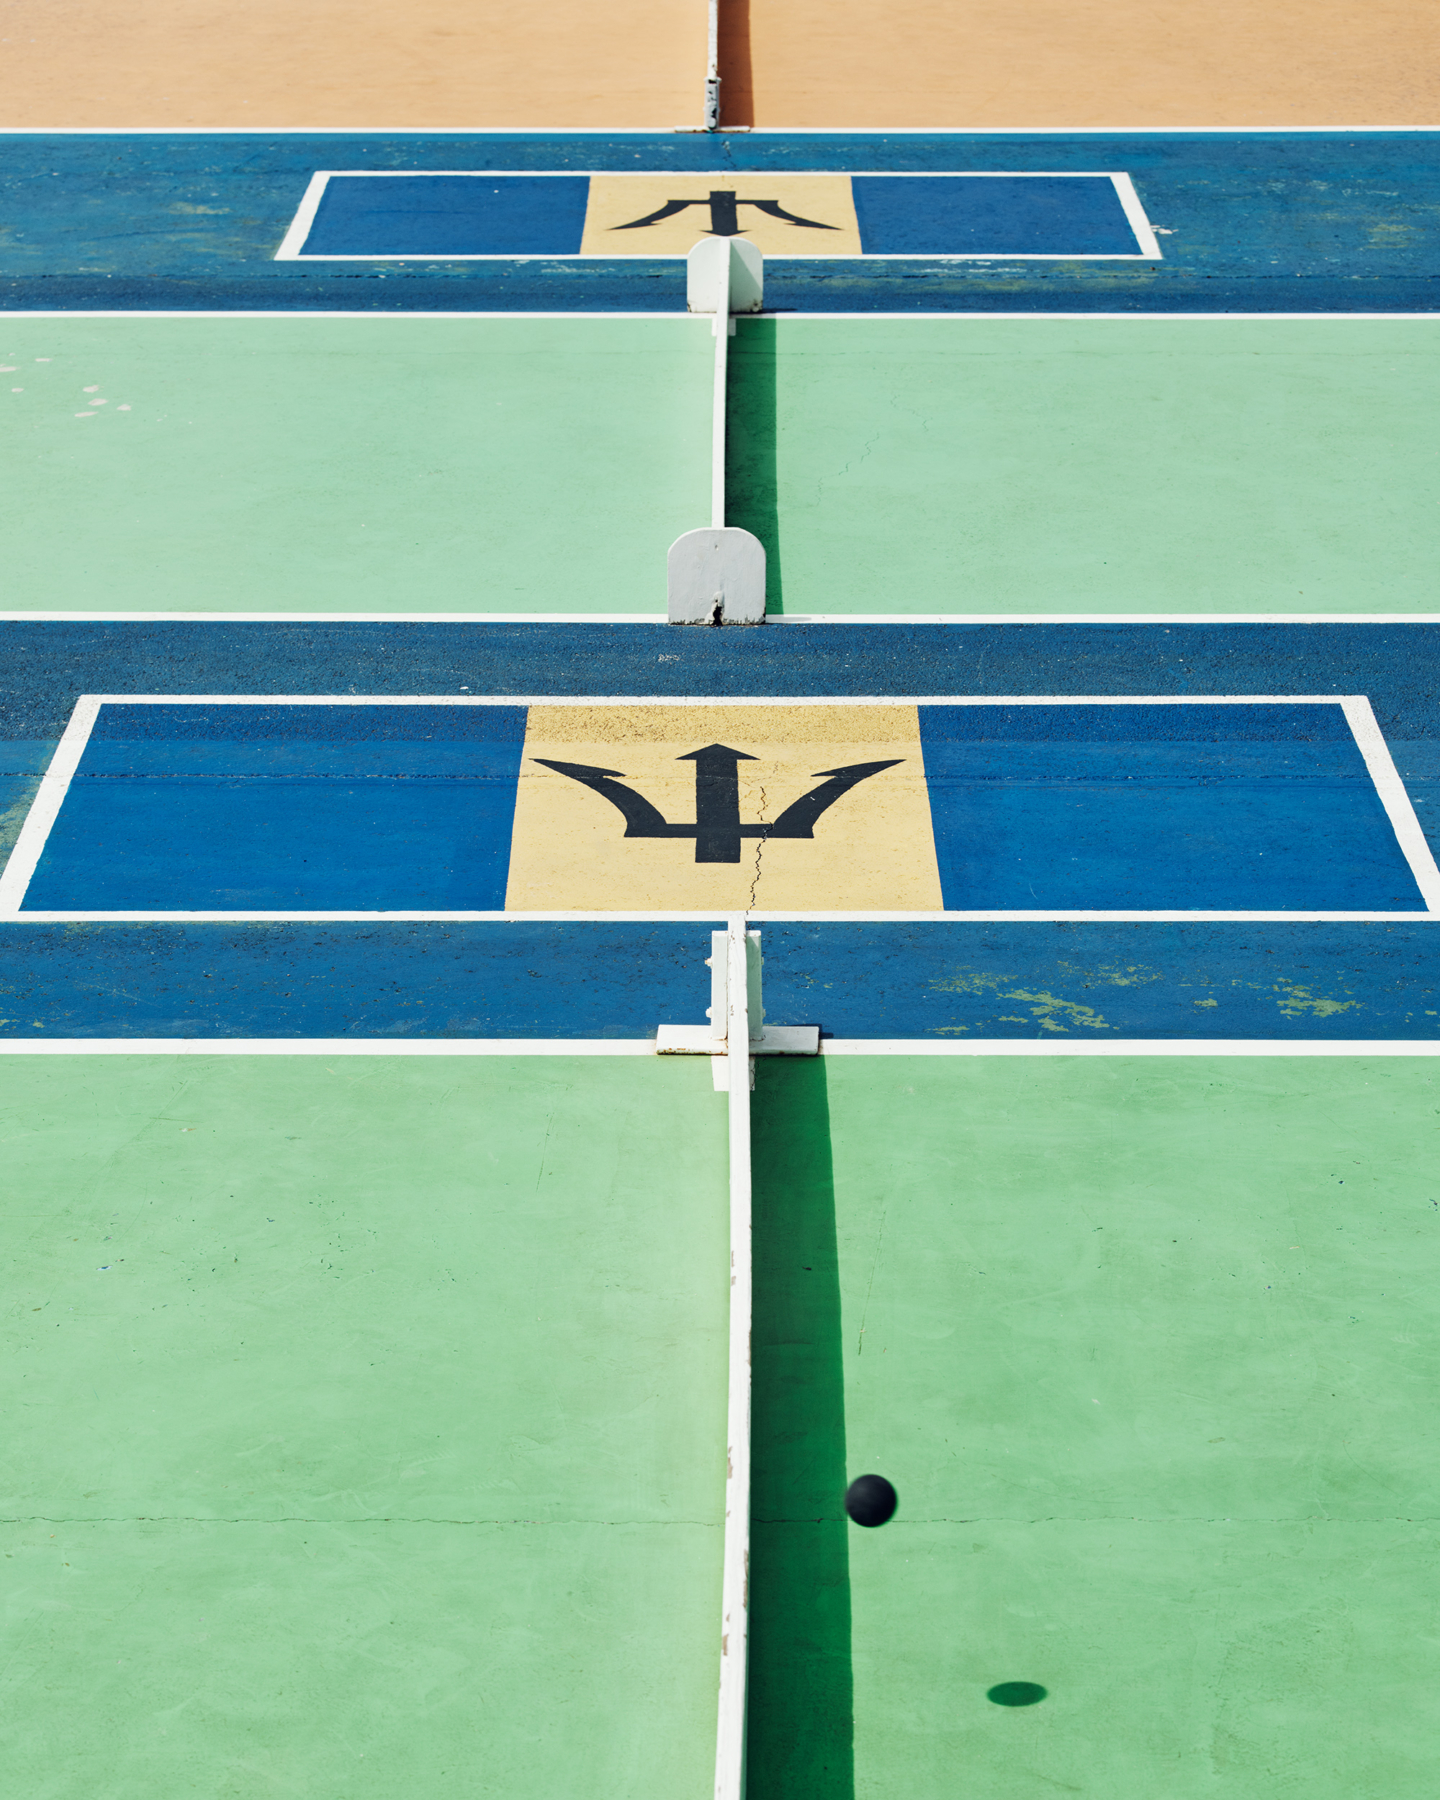 Road Tennis for Airbnb Magazine